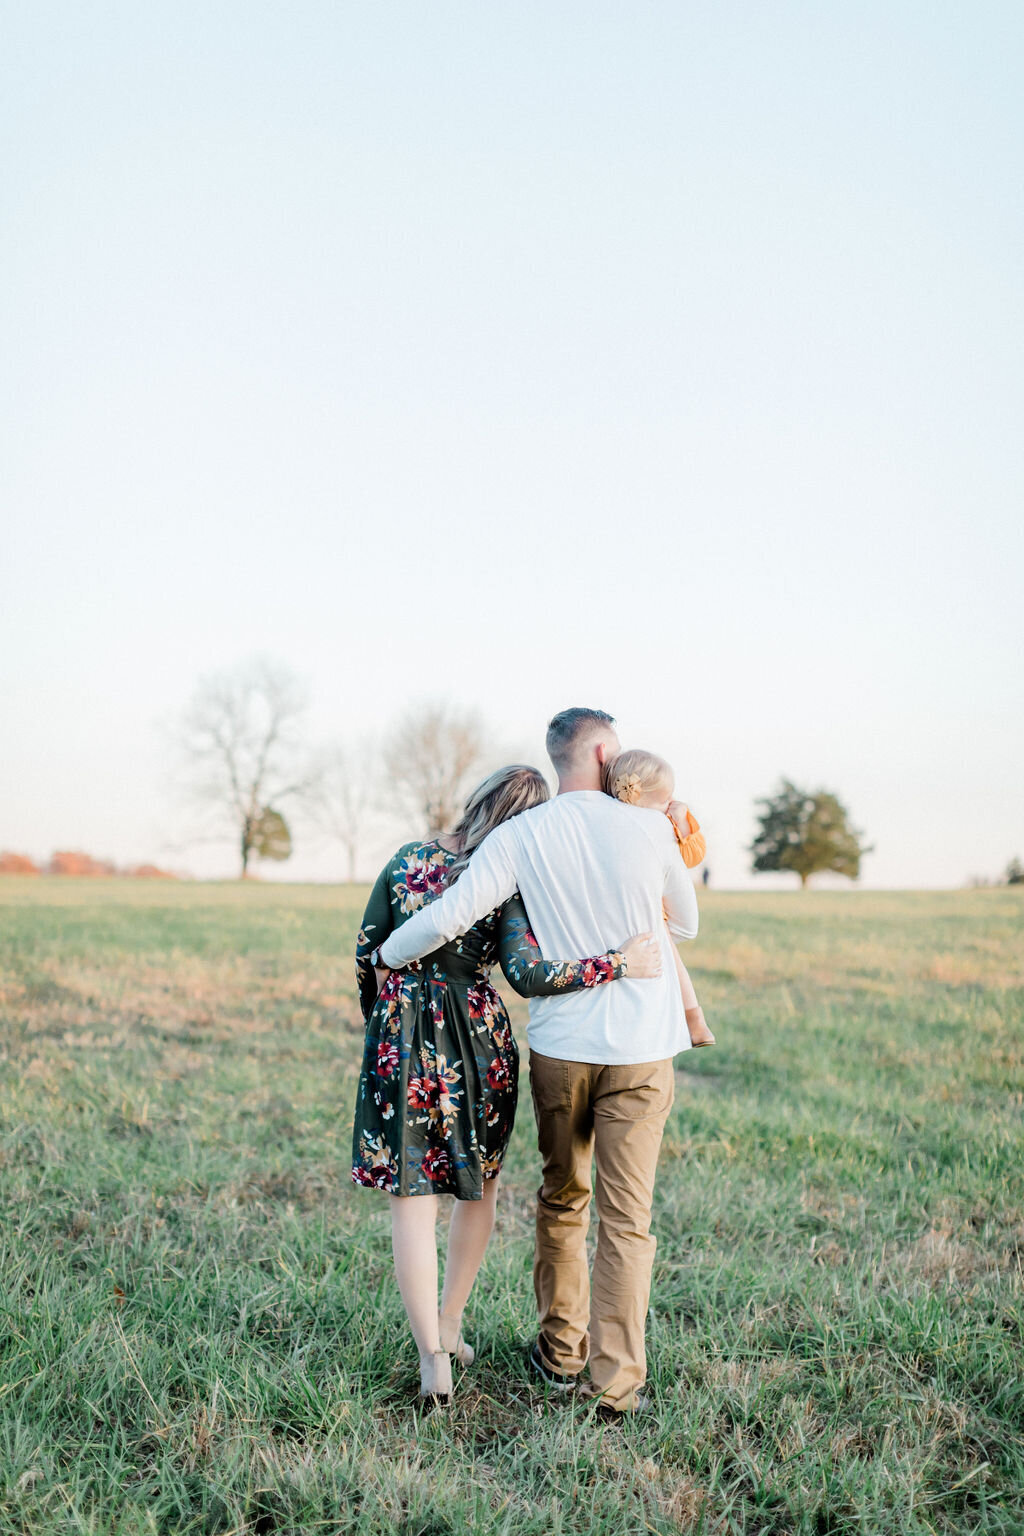 A family slowly walks into the distance holding each other during a family session in Washington, DC at Manassas Battlefield Park.